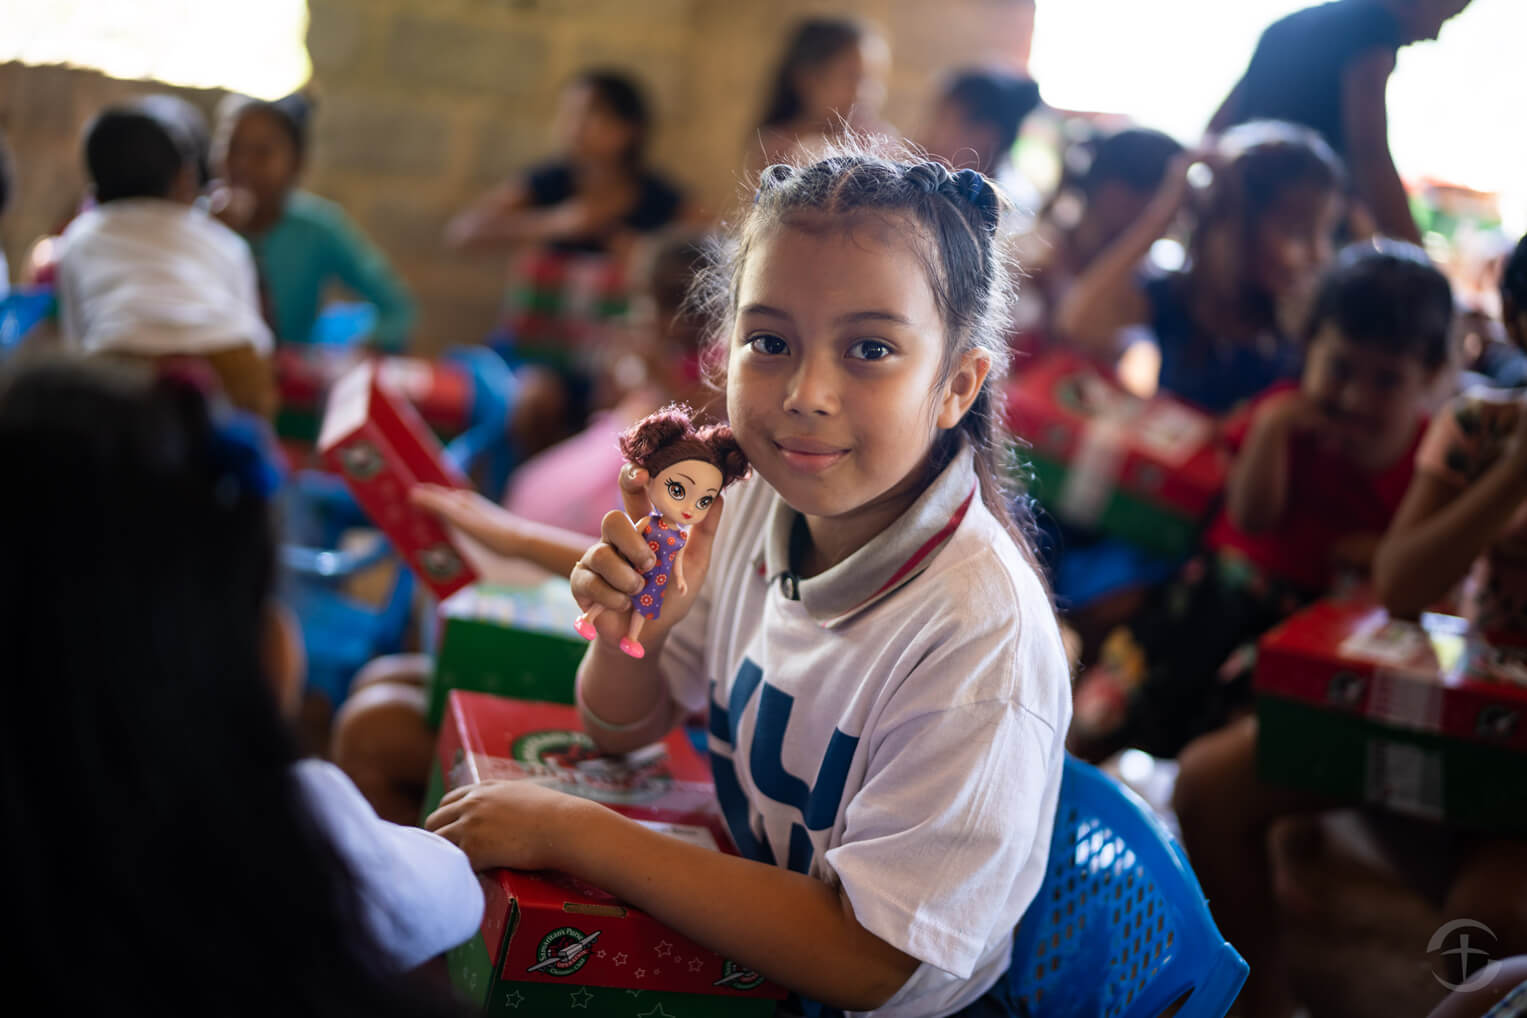 About 350,000 children receive Operation Christmas Chid shoeboxes in Honduras each year. Last year, more than 10.5 million shoebox gifts were collected for distribution worldwide.